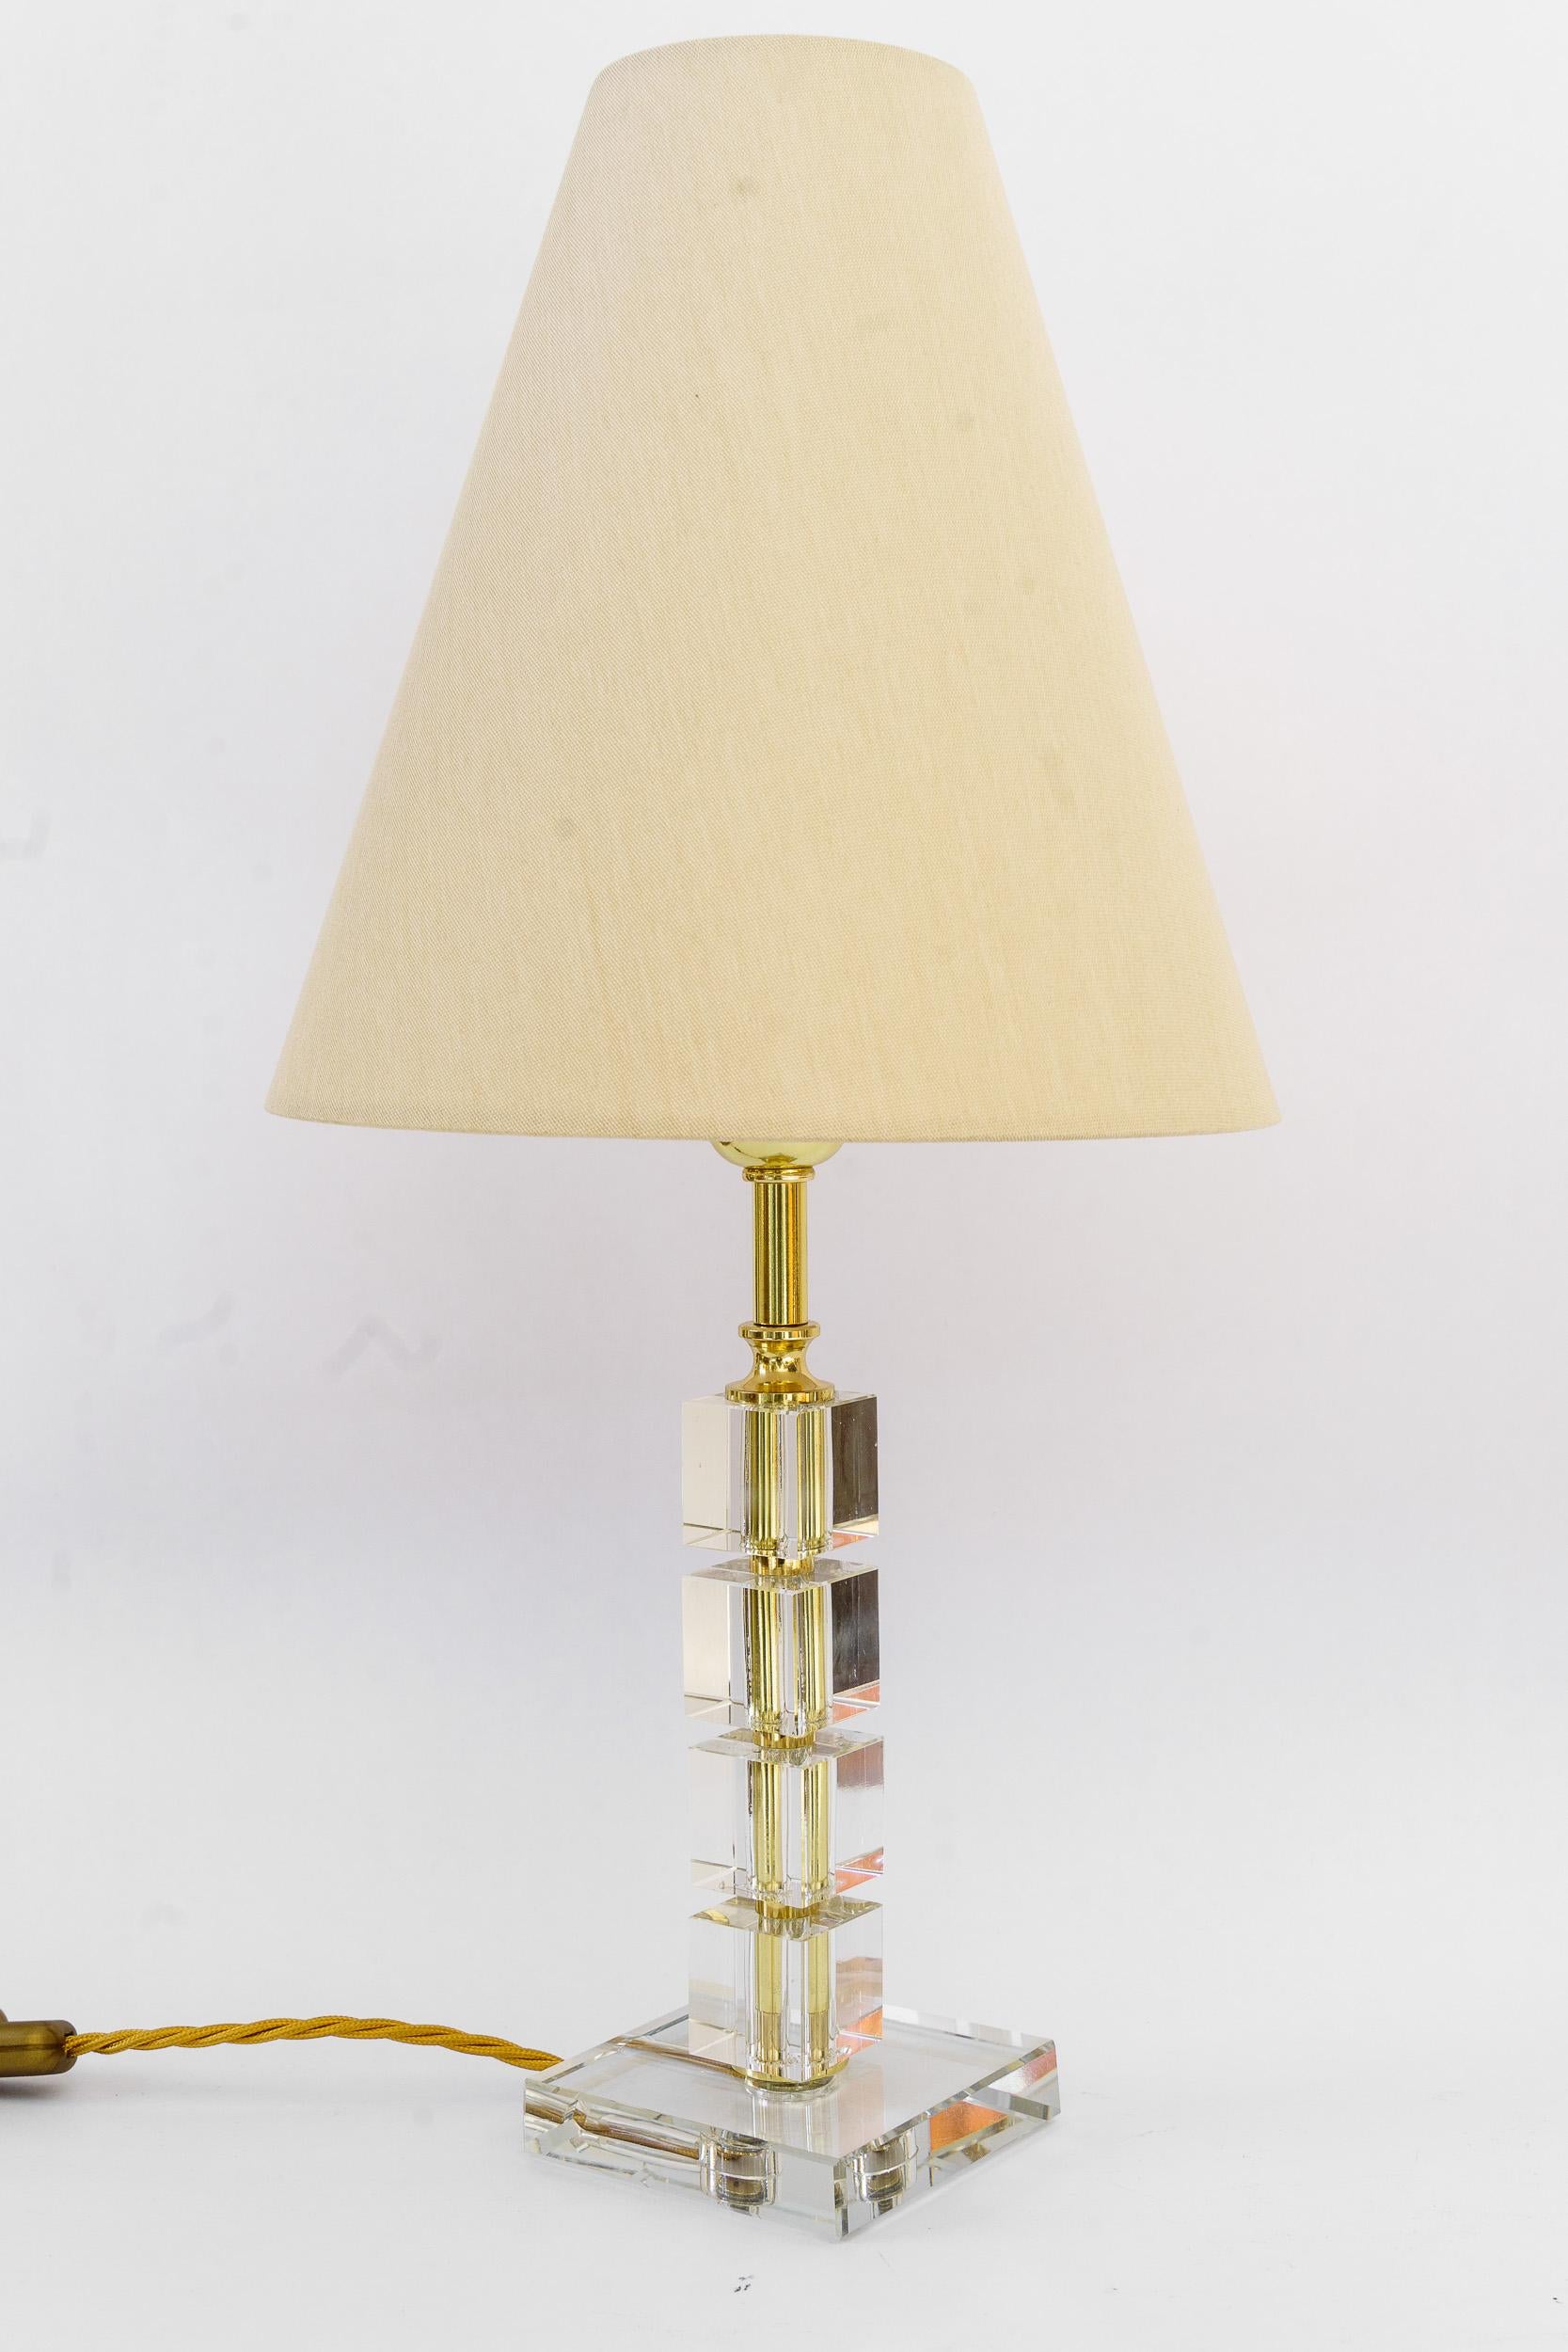 Big Bakalowits glass table lamp with fabric shade vienna around 1920s
Brass polished and stove enameled